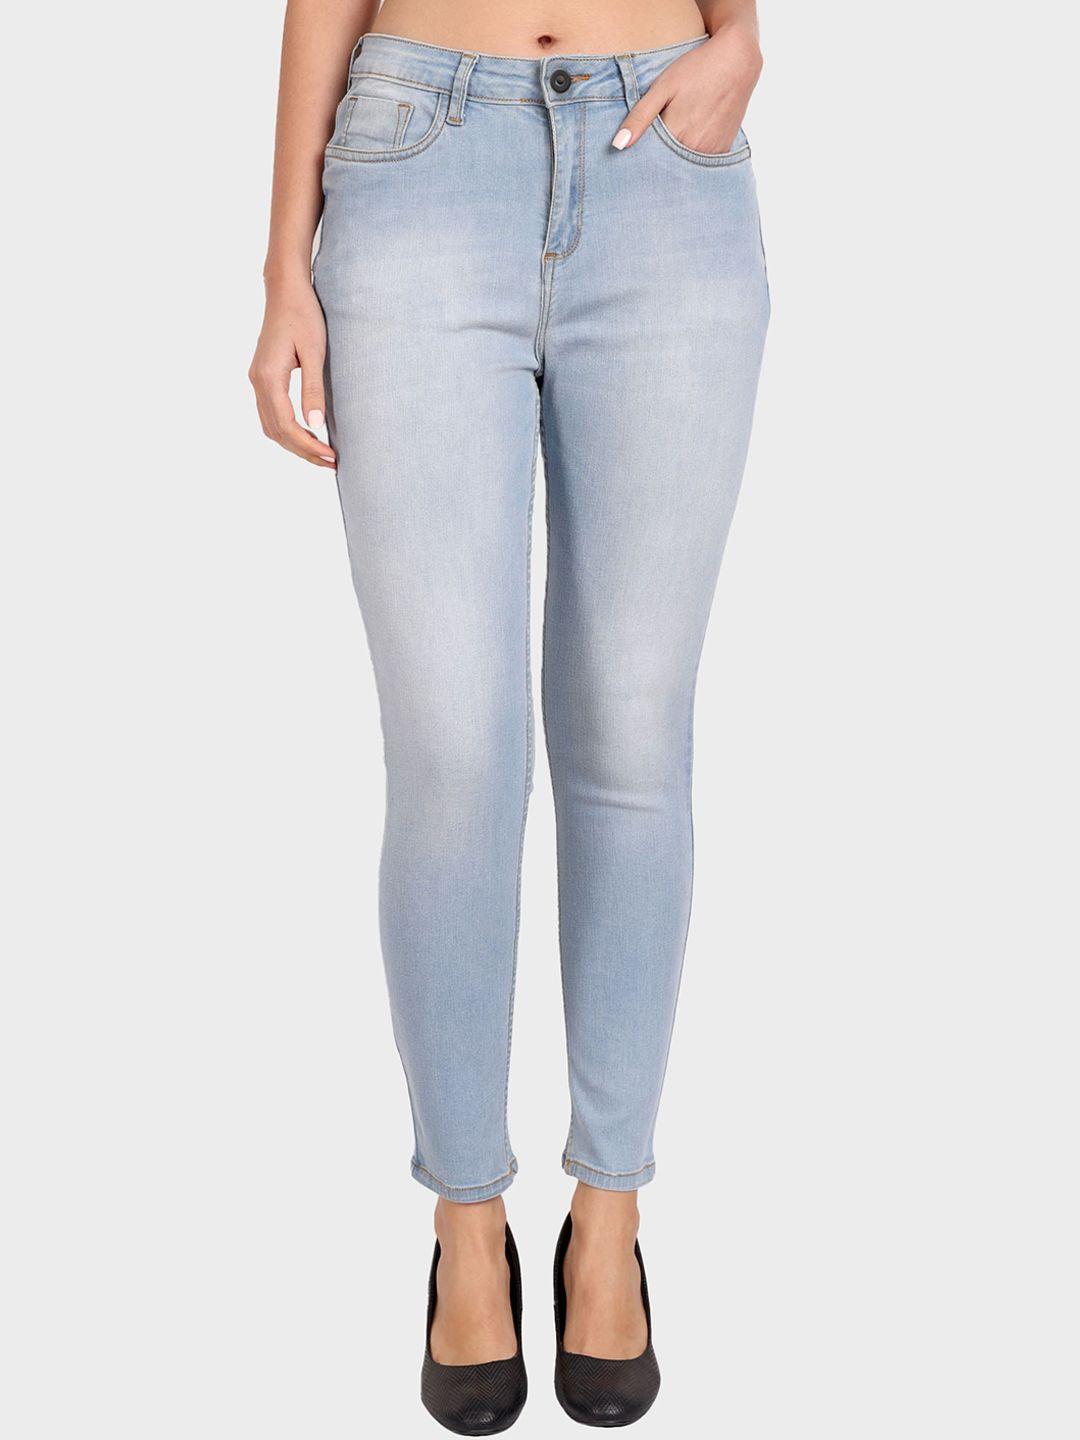 mast-&-harbour-women-blue-skinny-fit-high-rise-heavy-fade-stretchable-jeans